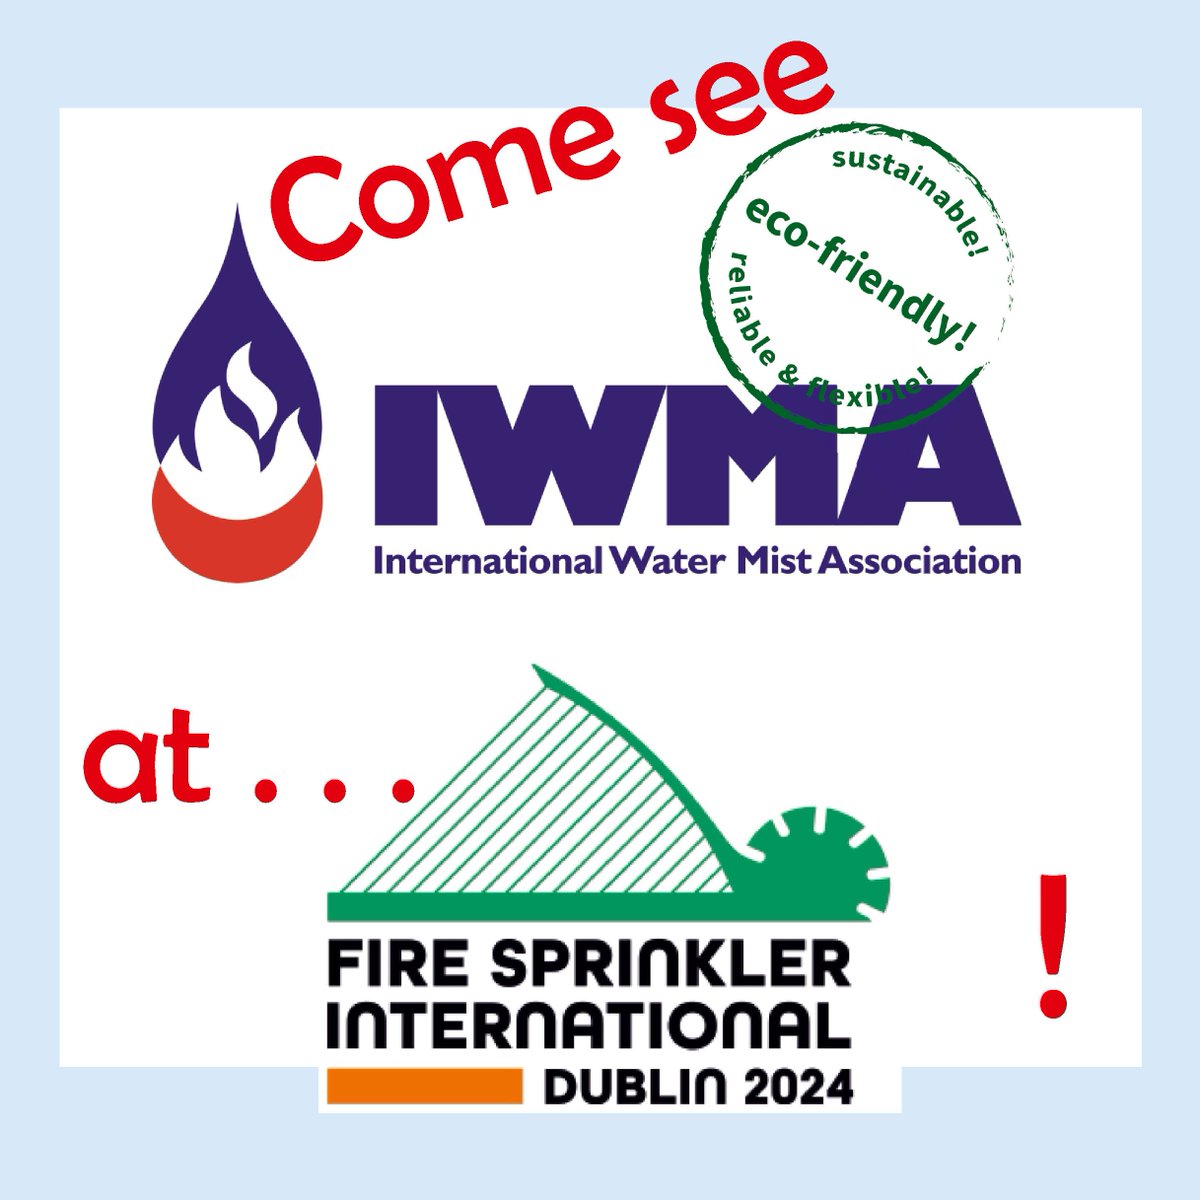 #FSI2024 will take place in Dublin on 24th & 25th April. There will be a #watermist session with expert speakers like #IWMA member Ryan Conaghan (Marioff) who will take about #watermist  - equivalent or better? #fireengineering #firesafety #EFSN #fireprotection #greentechnology